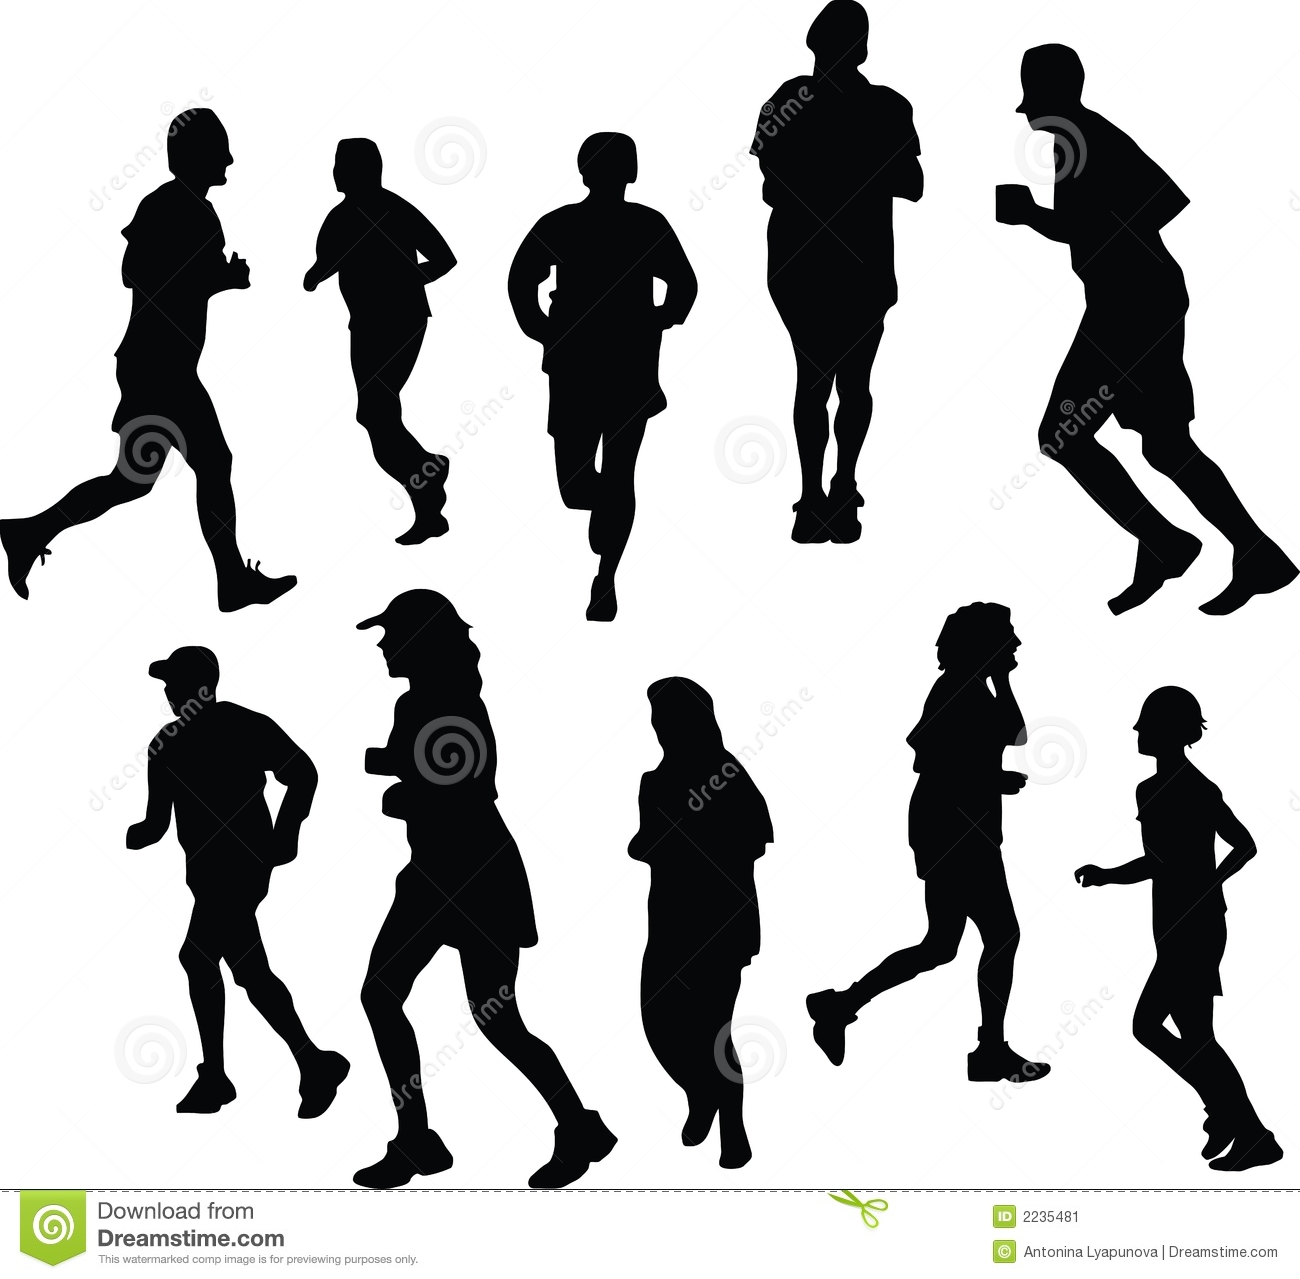 Jogging Silhouettes Stock Image   Image  2235481